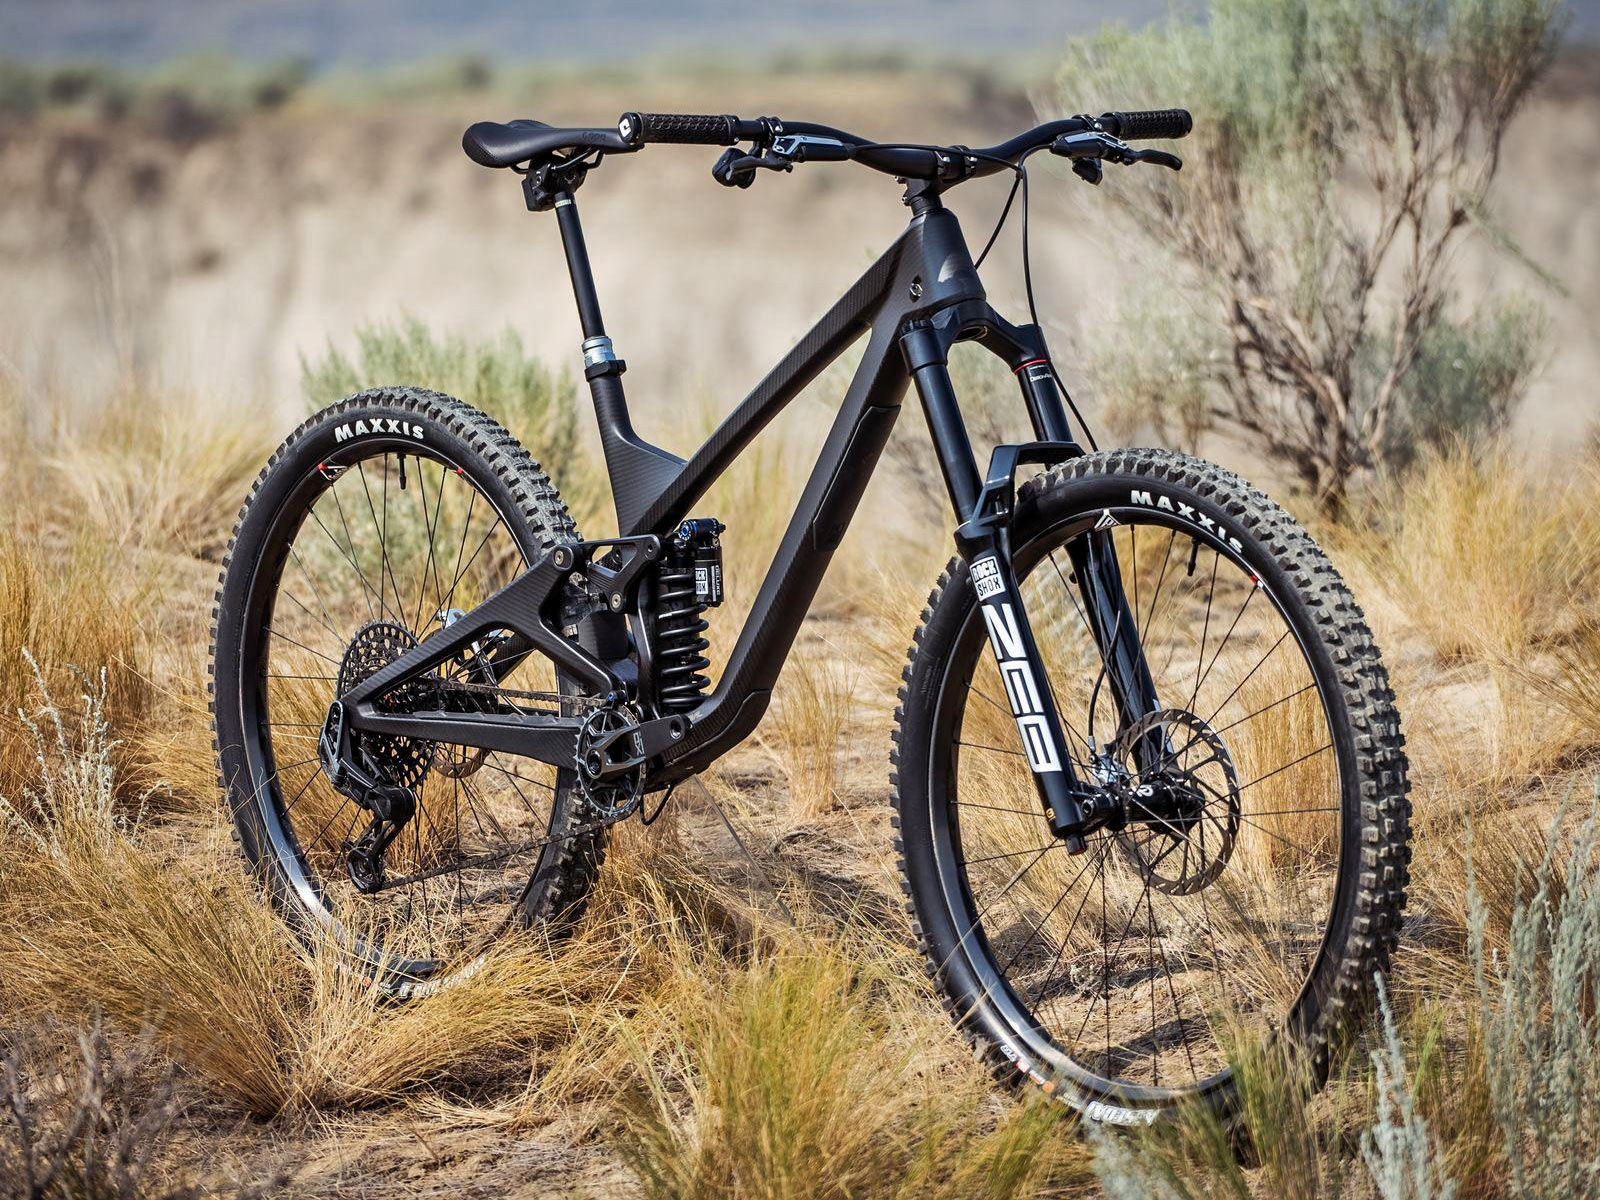 We Are One Arrival limited edition modular carbon mountain bike made-in-Canada, 170mm Enduro bike